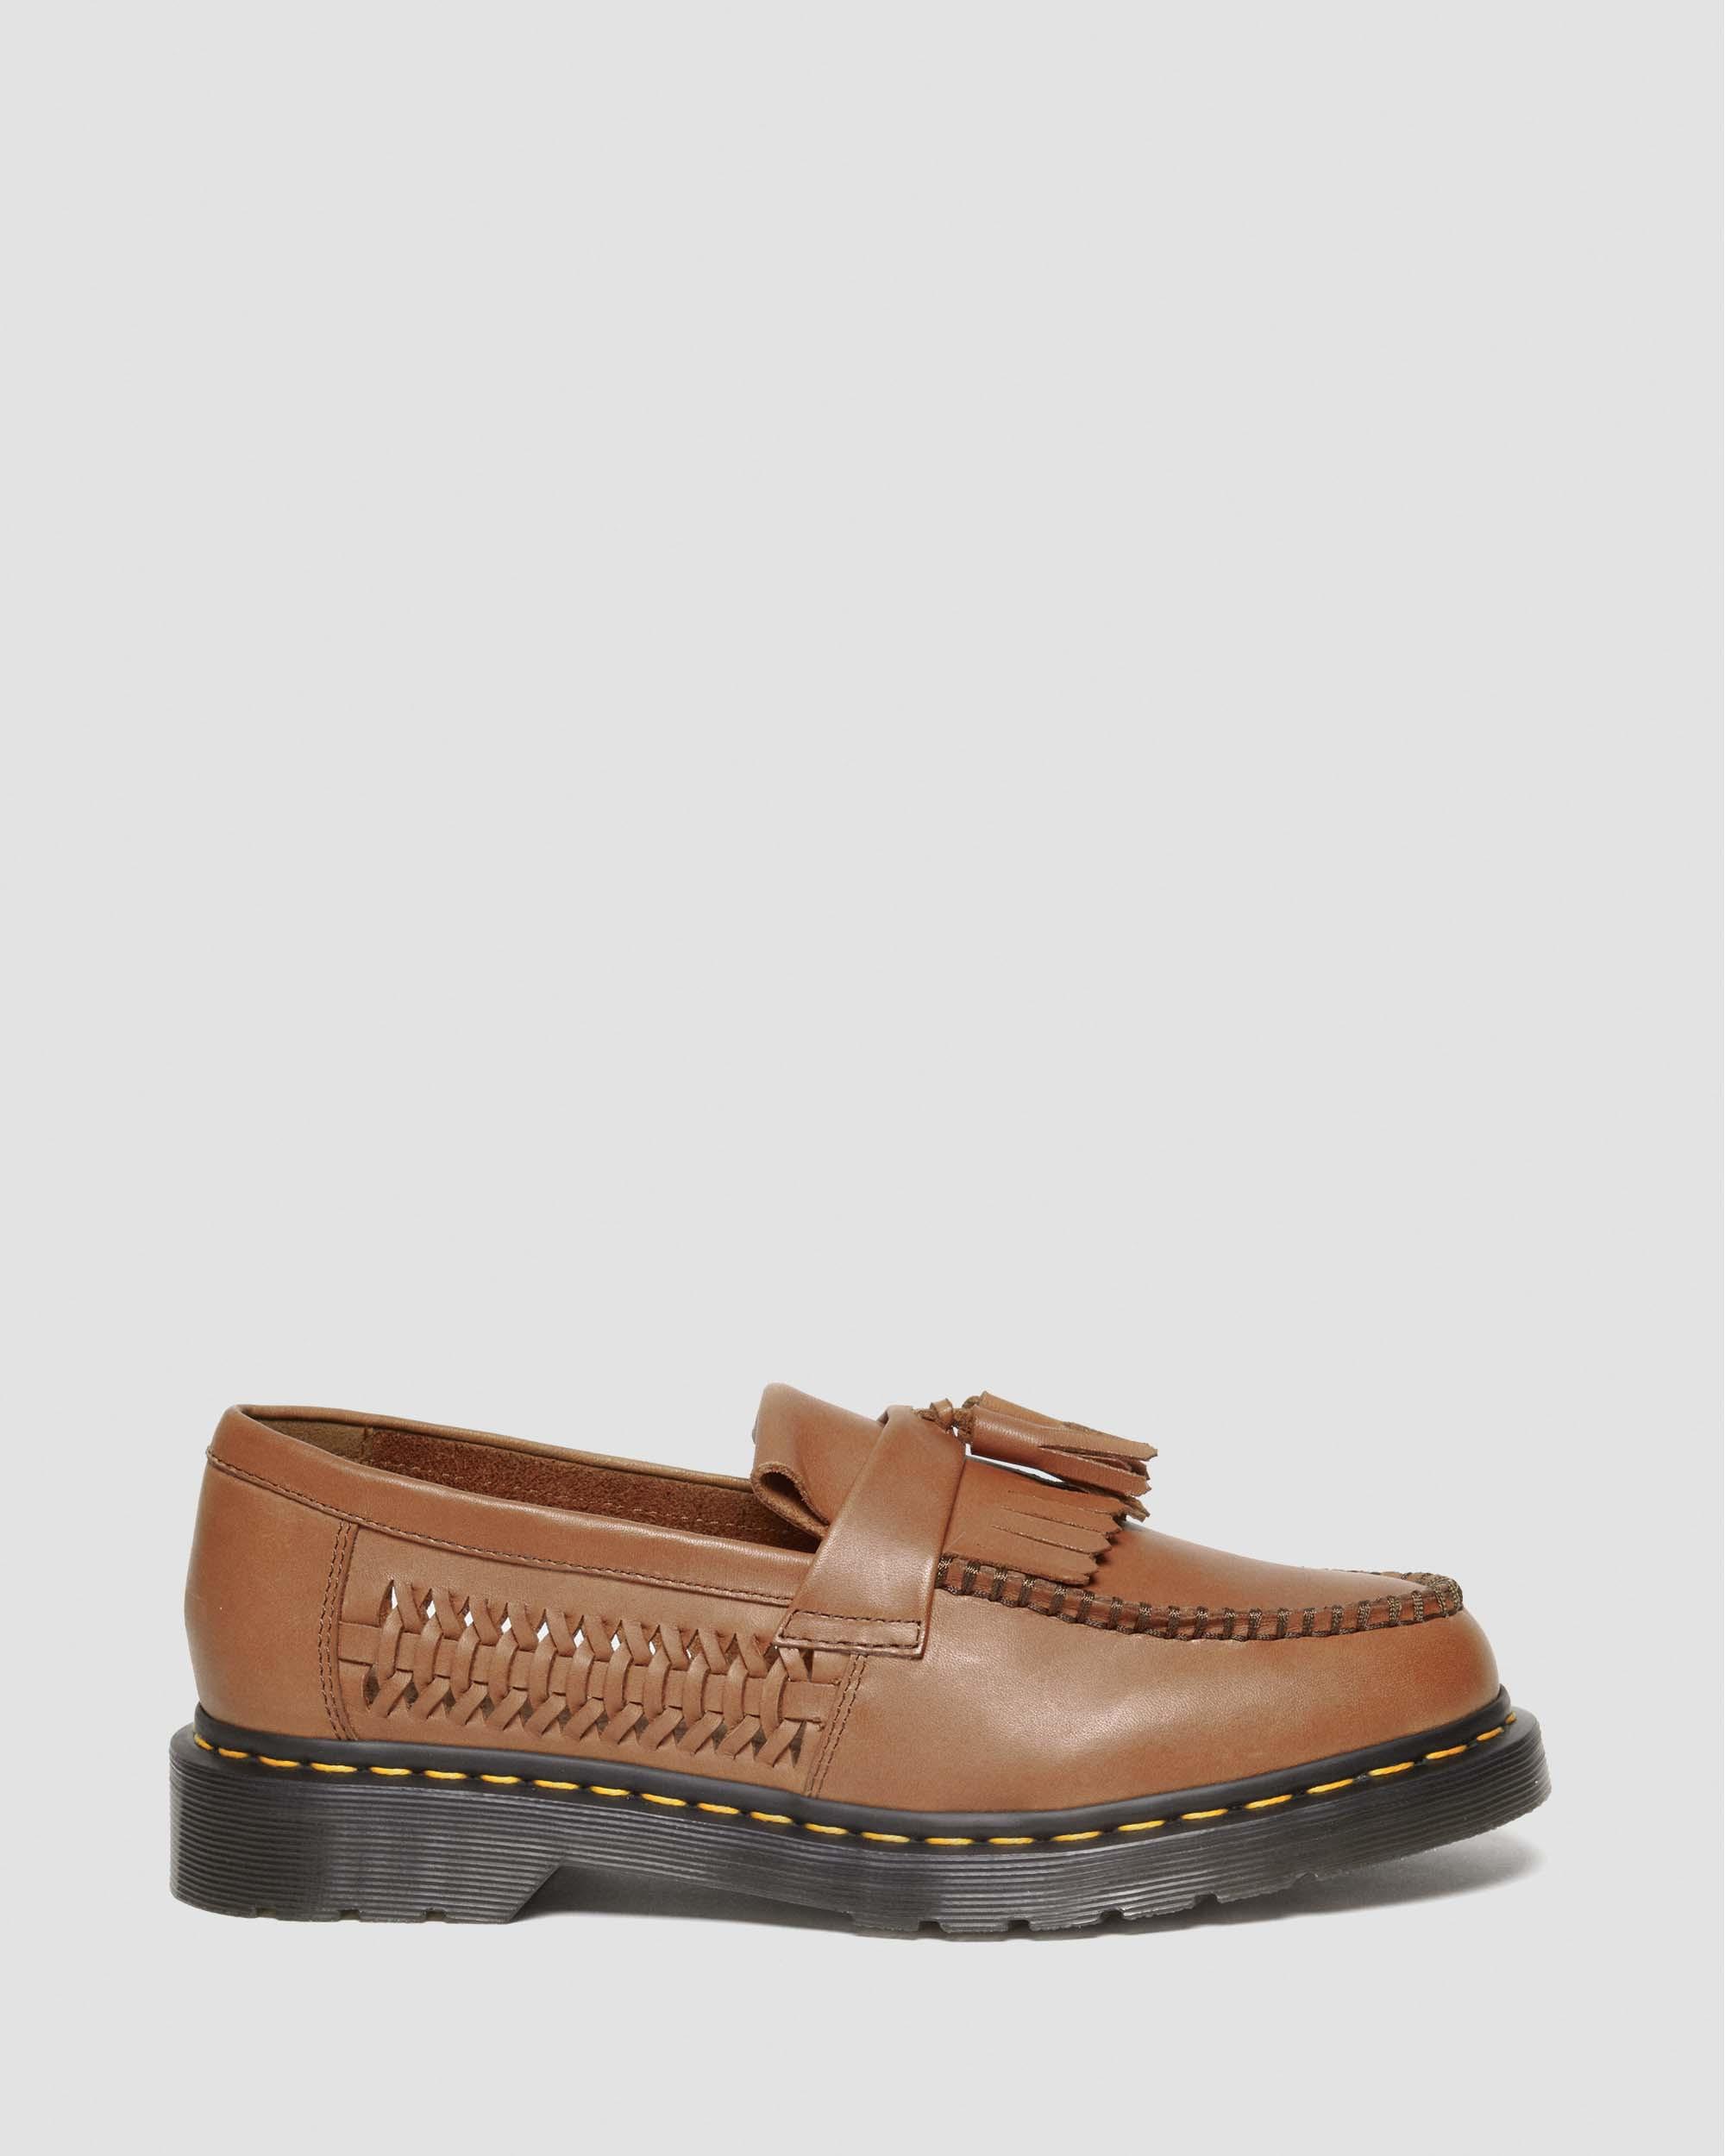 Adrian Woven Leather Tassel Loafers in British Tan | Dr. Martens